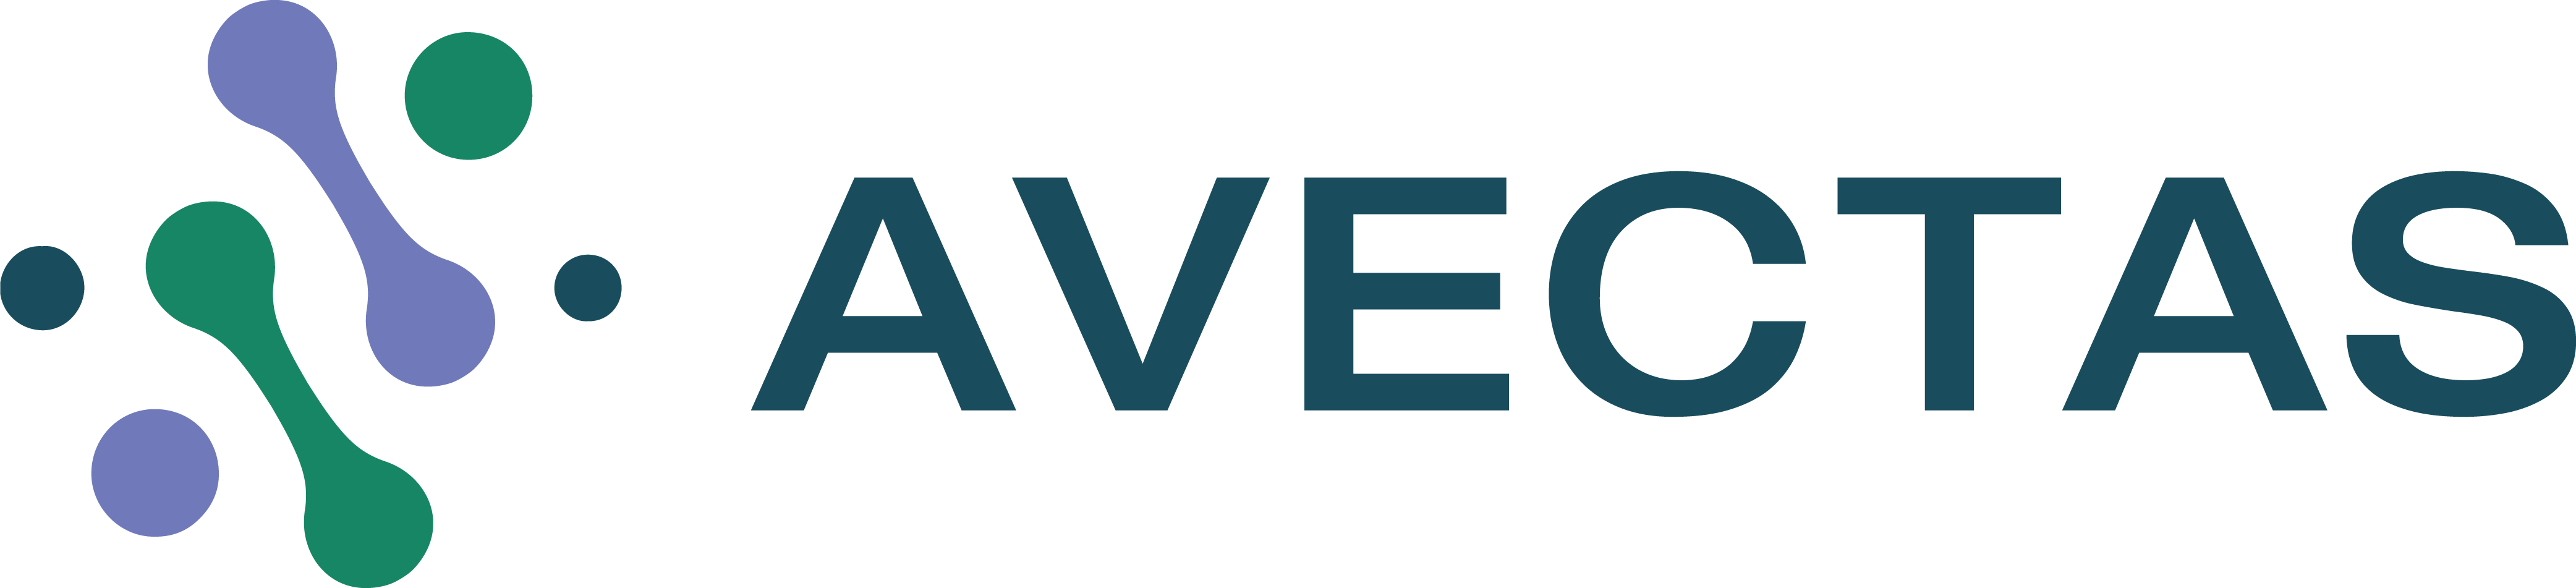 Avectas Limited - ByrneWallace LLP